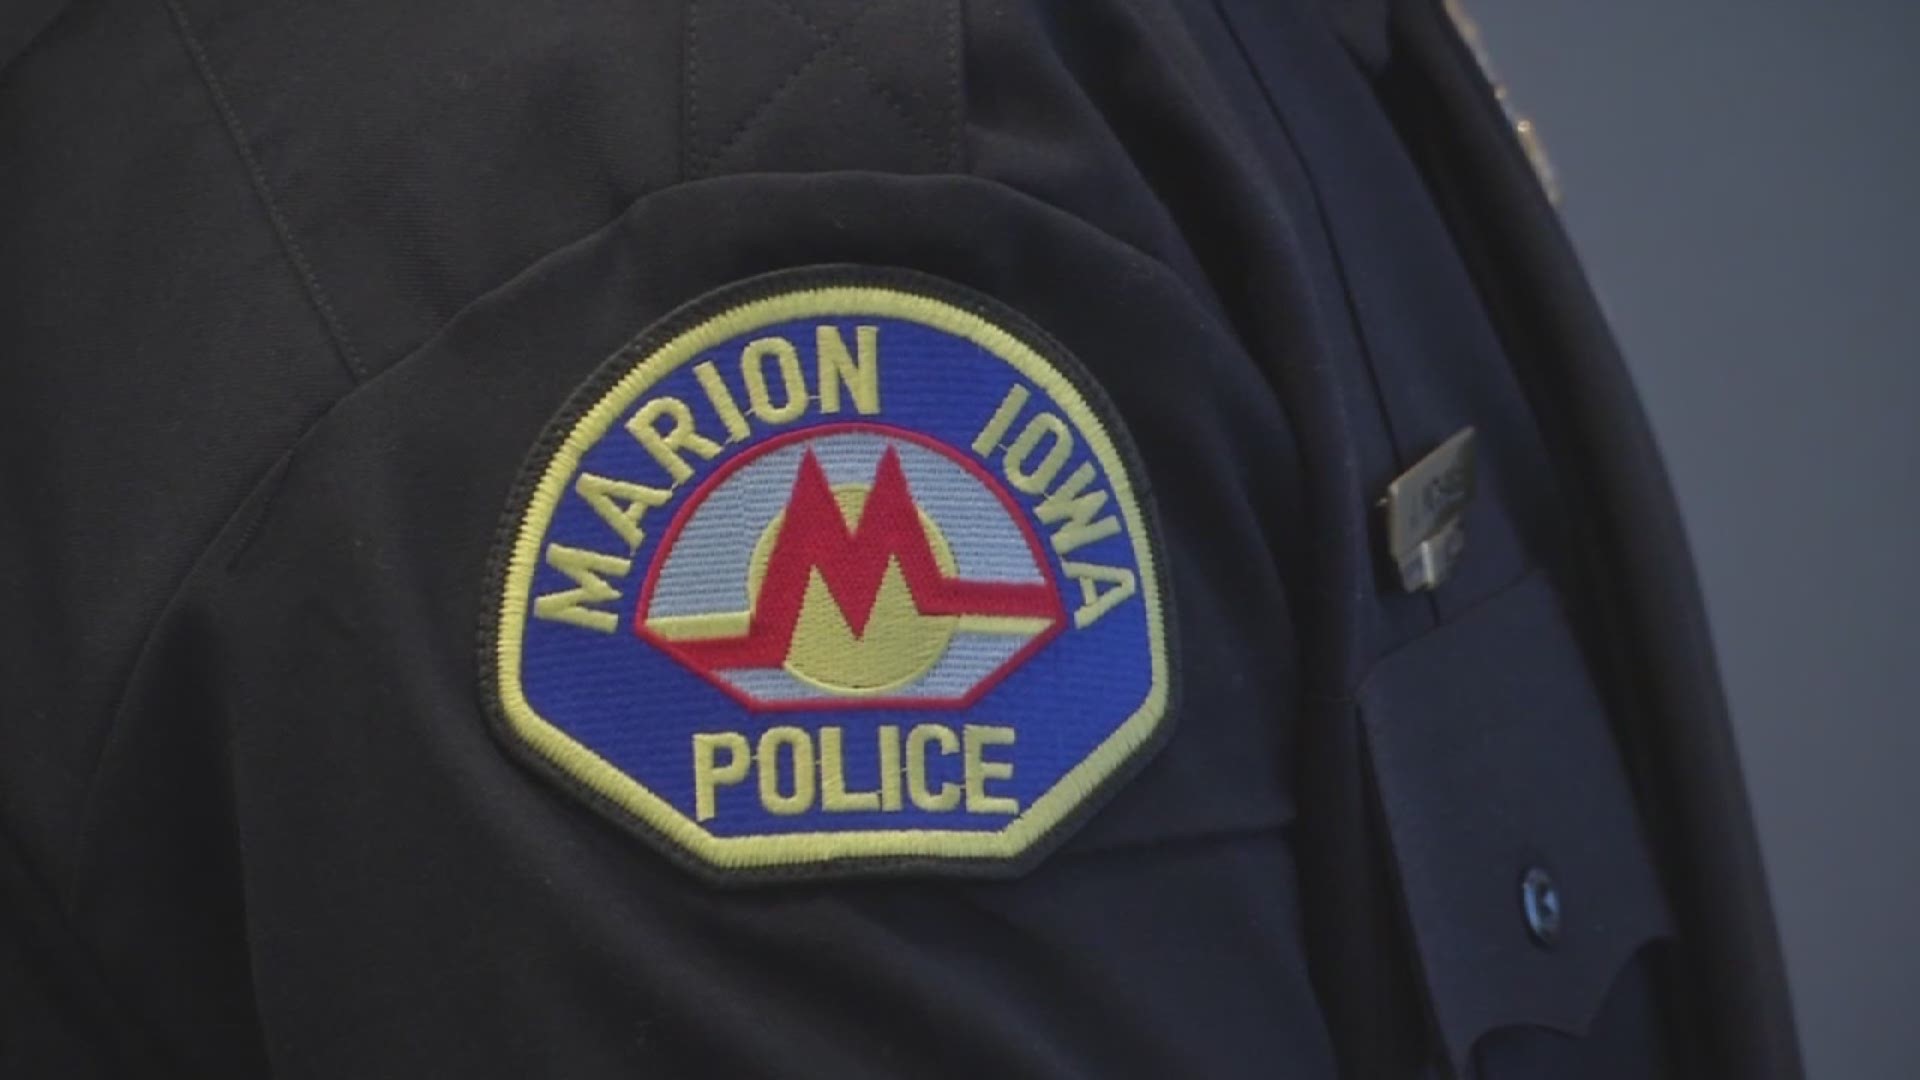 Marion Ia Live Webcam Porn - What does it take to become a police officer in Iowa? | weareiowa.com